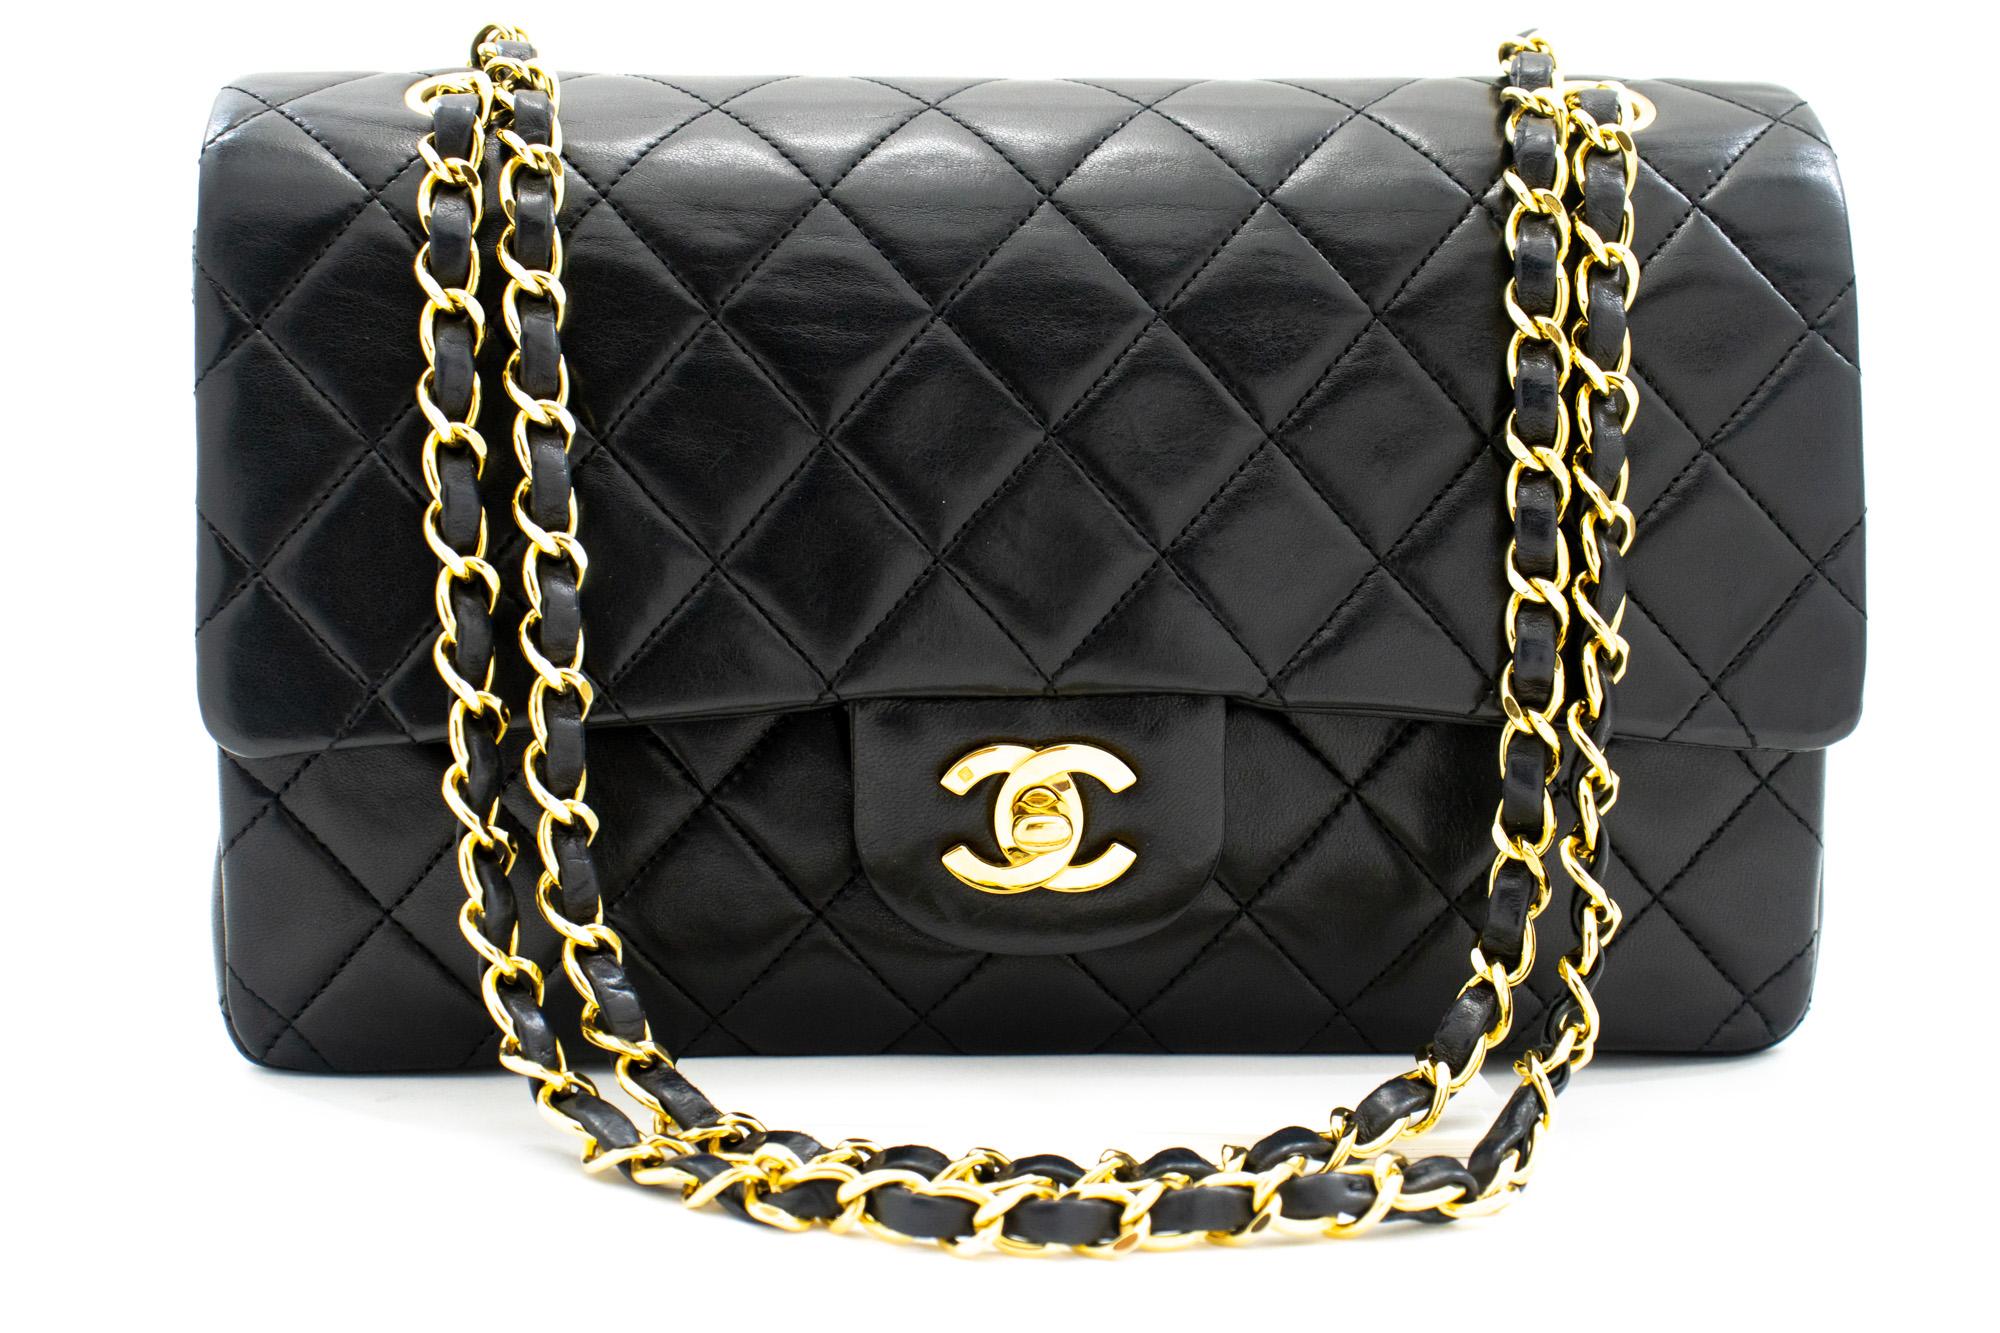 An authentic CHANEL Classic Double Flap 10